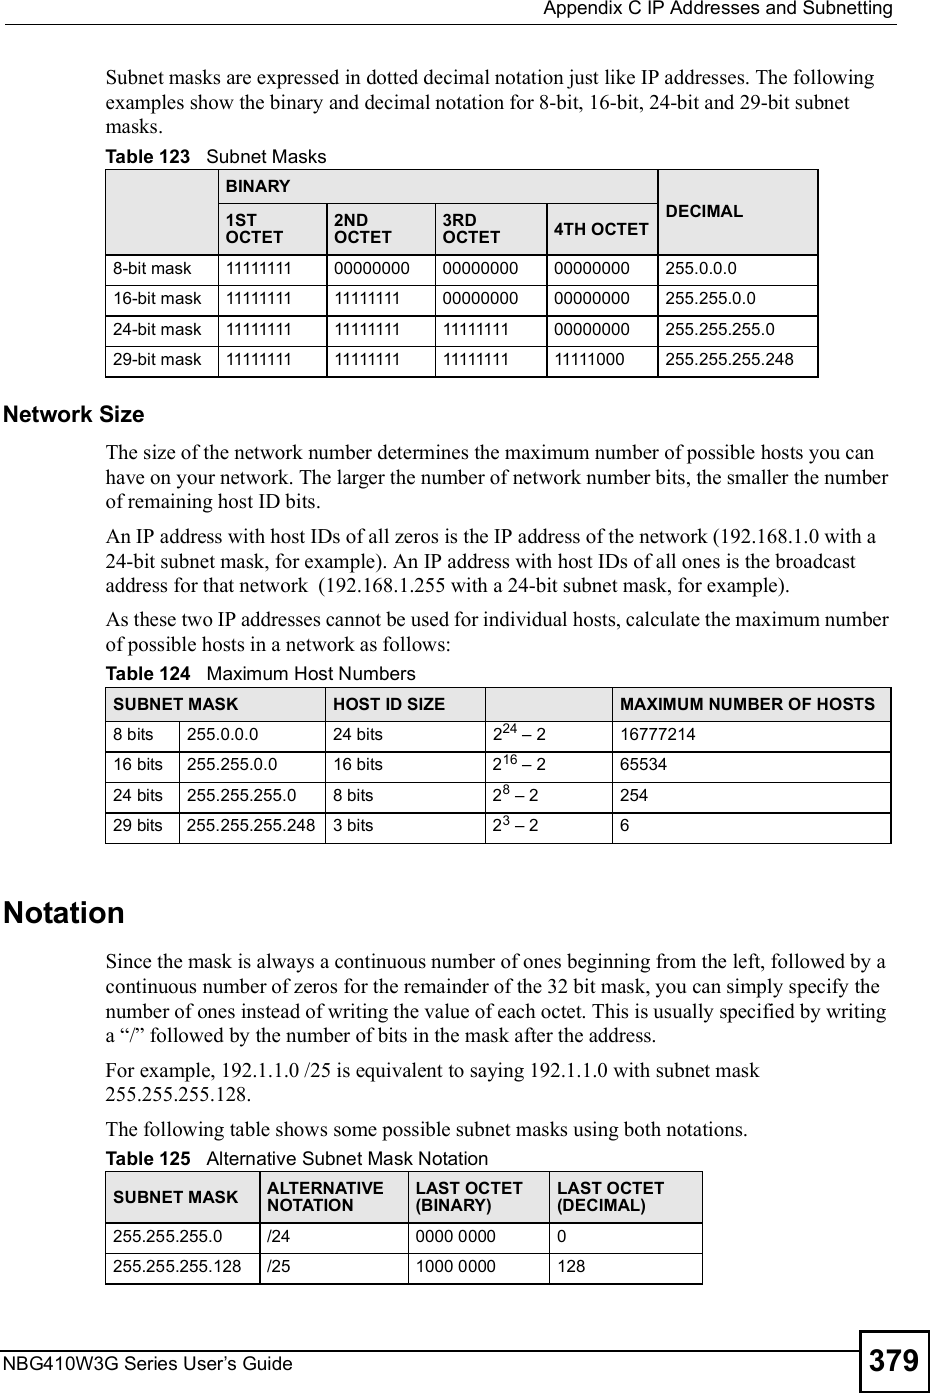  Appendix CIP Addresses and SubnettingNBG410W3G Series User s Guide 379Subnet masks are expressed in dotted decimal notation just like IP addresses. The following examples show the binary and decimal notation for 8-bit, 16-bit, 24-bit and 29-bit subnet masks. Network SizeThe size of the network number determines the maximum number of possible hosts you can have on your network. The larger the number of network number bits, the smaller the number of remaining host ID bits. An IP address with host IDs of all zeros is the IP address of the network (192.168.1.0 with a 24-bit subnet mask, for example). An IP address with host IDs of all ones is the broadcast address for that network  (192.168.1.255 with a 24-bit subnet mask, for example).As these two IP addresses cannot be used for individual hosts, calculate the maximum number of possible hosts in a network as follows:NotationSince the mask is always a continuous number of ones beginning from the left, followed by a continuous number of zeros for the remainder of the 32 bit mask, you can simply specify the number of ones instead of writing the value of each octet. This is usually specified by writing a &quot;/# followed by the number of bits in the mask after the address. For example, 192.1.1.0 /25 is equivalent to saying 192.1.1.0 with subnet mask 255.255.255.128. The following table shows some possible subnet masks using both notations. Table 123   Subnet MasksBINARYDECIMAL1ST OCTET2ND OCTET3RD OCTET 4TH OCTET8-bit mask 11111111 00000000 00000000 00000000 255.0.0.016-bit mask 11111111 11111111 00000000 00000000 255.255.0.024-bit mask 11111111 11111111 11111111 00000000 255.255.255.029-bit mask 11111111 11111111 11111111 11111000 255.255.255.248Table 124   Maximum Host NumbersSUBNET MASK HOST ID SIZE MAXIMUM NUMBER OF HOSTS8 bits255.0.0.024 bits224 $ 21677721416 bits255.255.0.016 bits216 $ 26553424 bits255.255.255.08 bits28 $ 225429 bits255.255.255.2483 bits23 $ 26Table 125   Alternative Subnet Mask NotationSUBNET MASK ALTERNATIVE NOTATIONLAST OCTET (BINARY)LAST OCTET (DECIMAL)255.255.255.0 /24 0000 0000 0255.255.255.128 /25 1000 0000 128